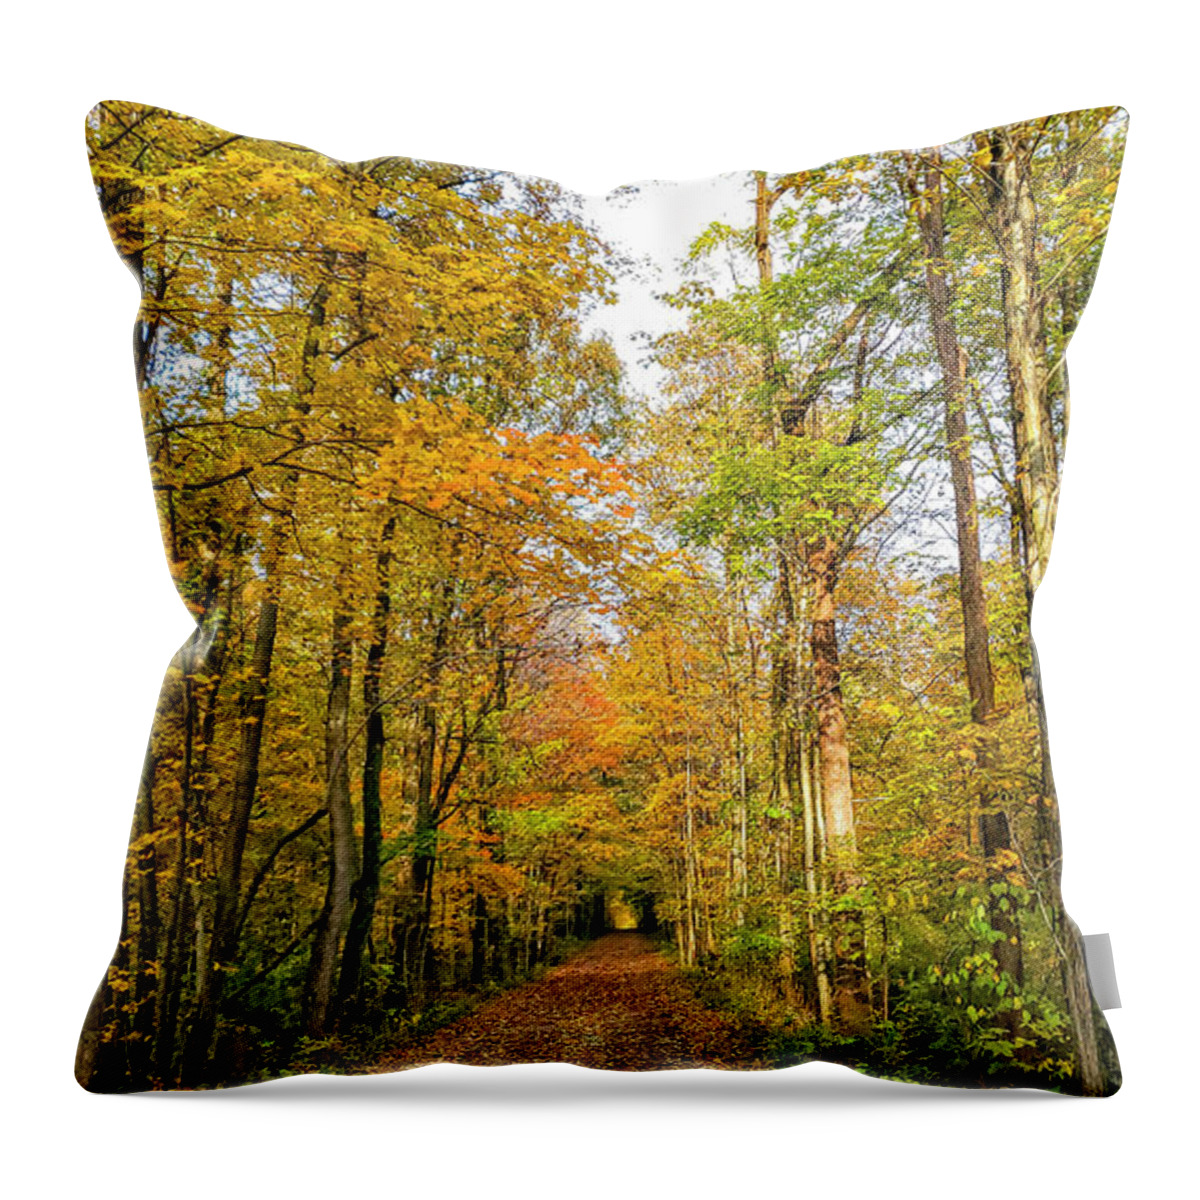 Autumn Throw Pillow featuring the photograph Autumn Trail by Chris Spencer